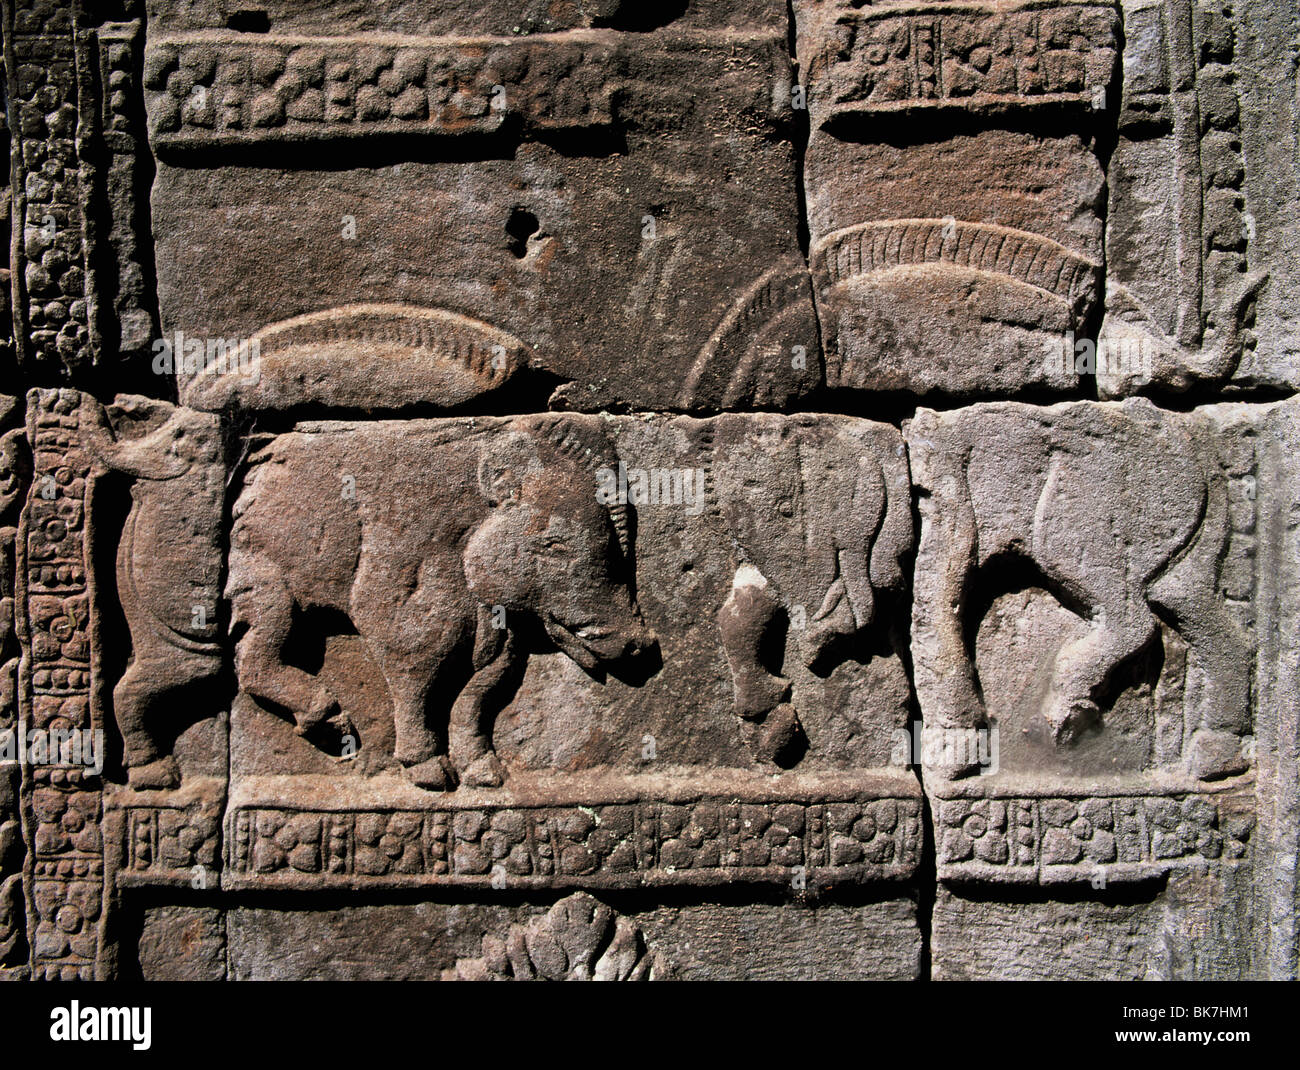 Relief of wild boars fighting dating from the 11th century, Bapuon, Angkor, UNESCO World Heritage Site, Cambodia Stock Photo